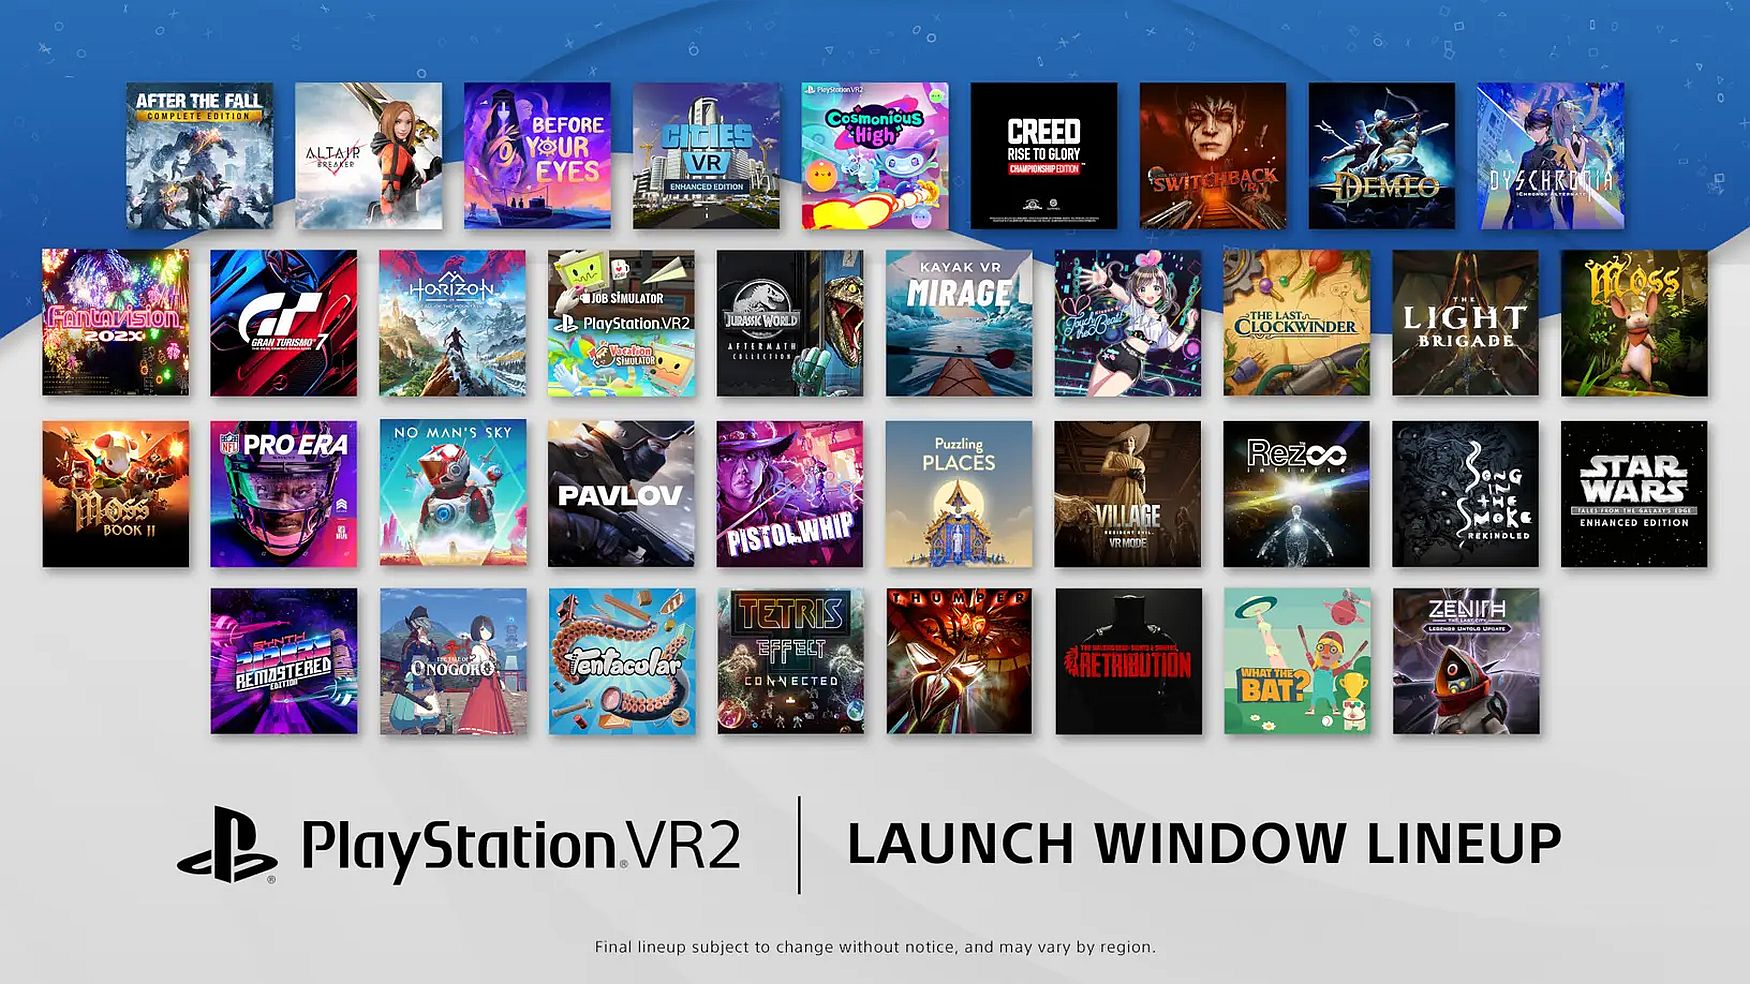 Image for 13 additional games coming to PlayStation VR2 within launch window